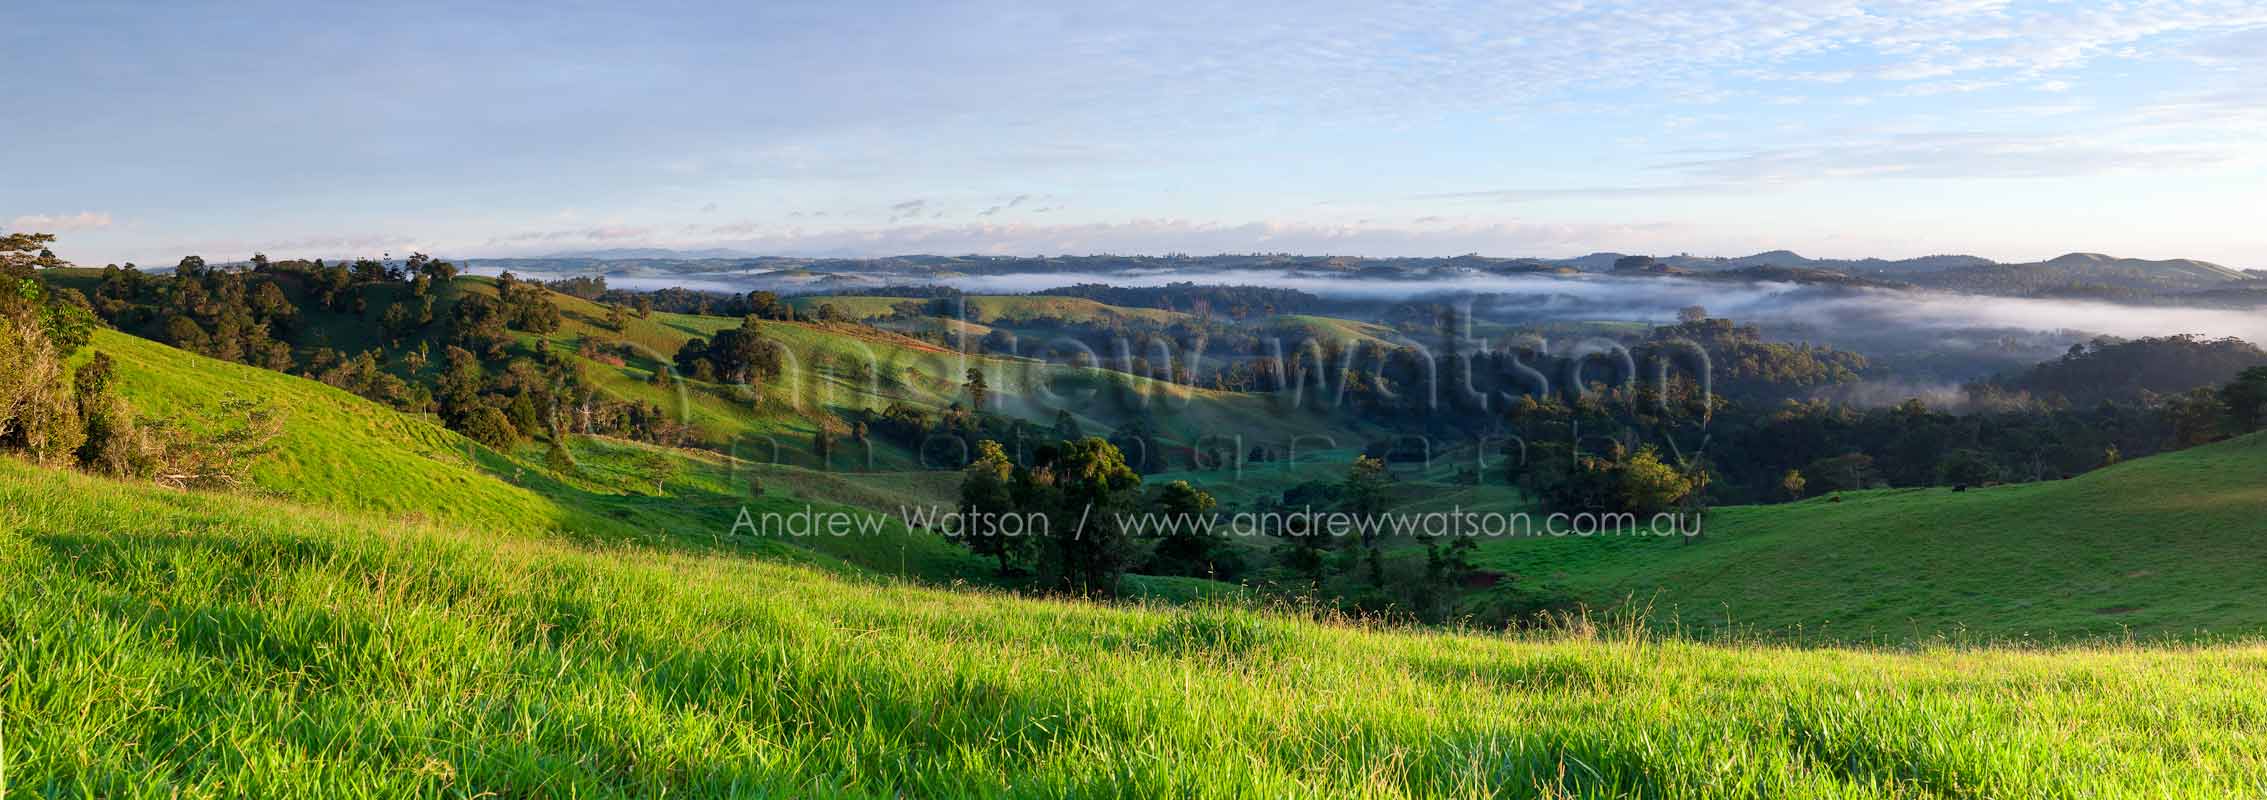 Dawn view across pastures on Atherton TablelandsMillaa Millaa, North QueenslandImage available for licensing or as a fine-art print... please enquire